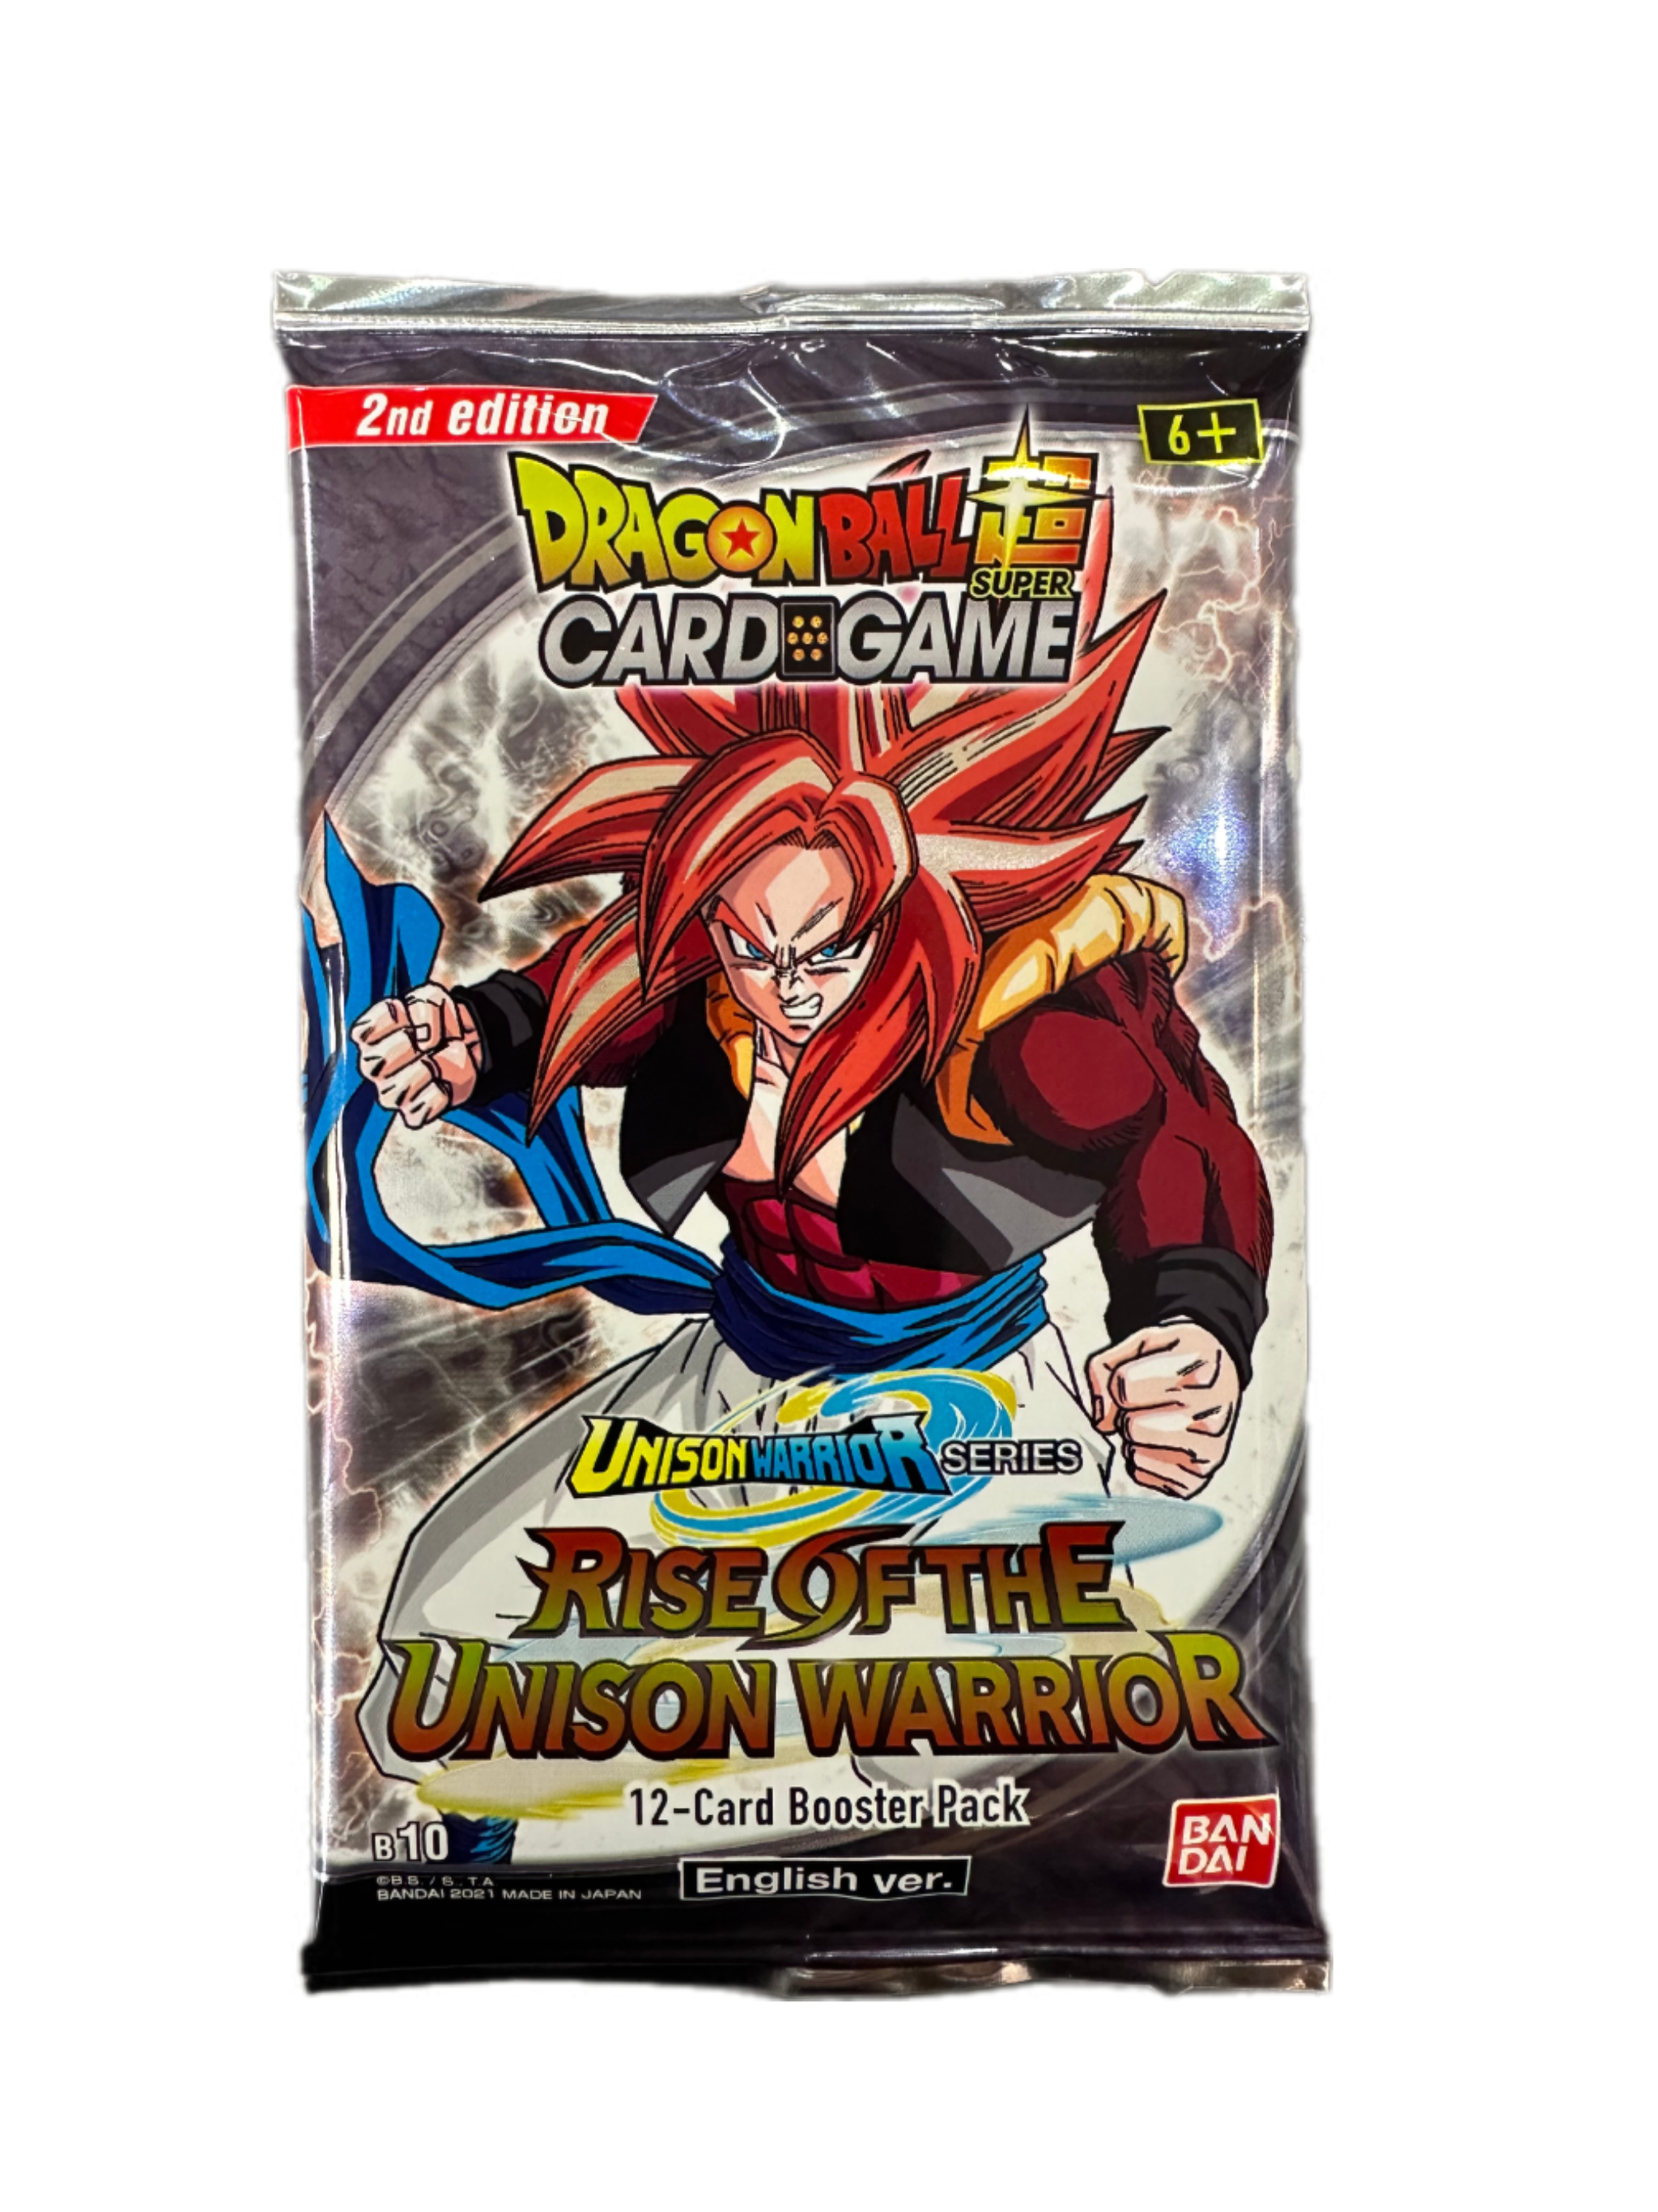 Dragonball Super Card Game-Unison Warrior Rise of the Booster*Englisch